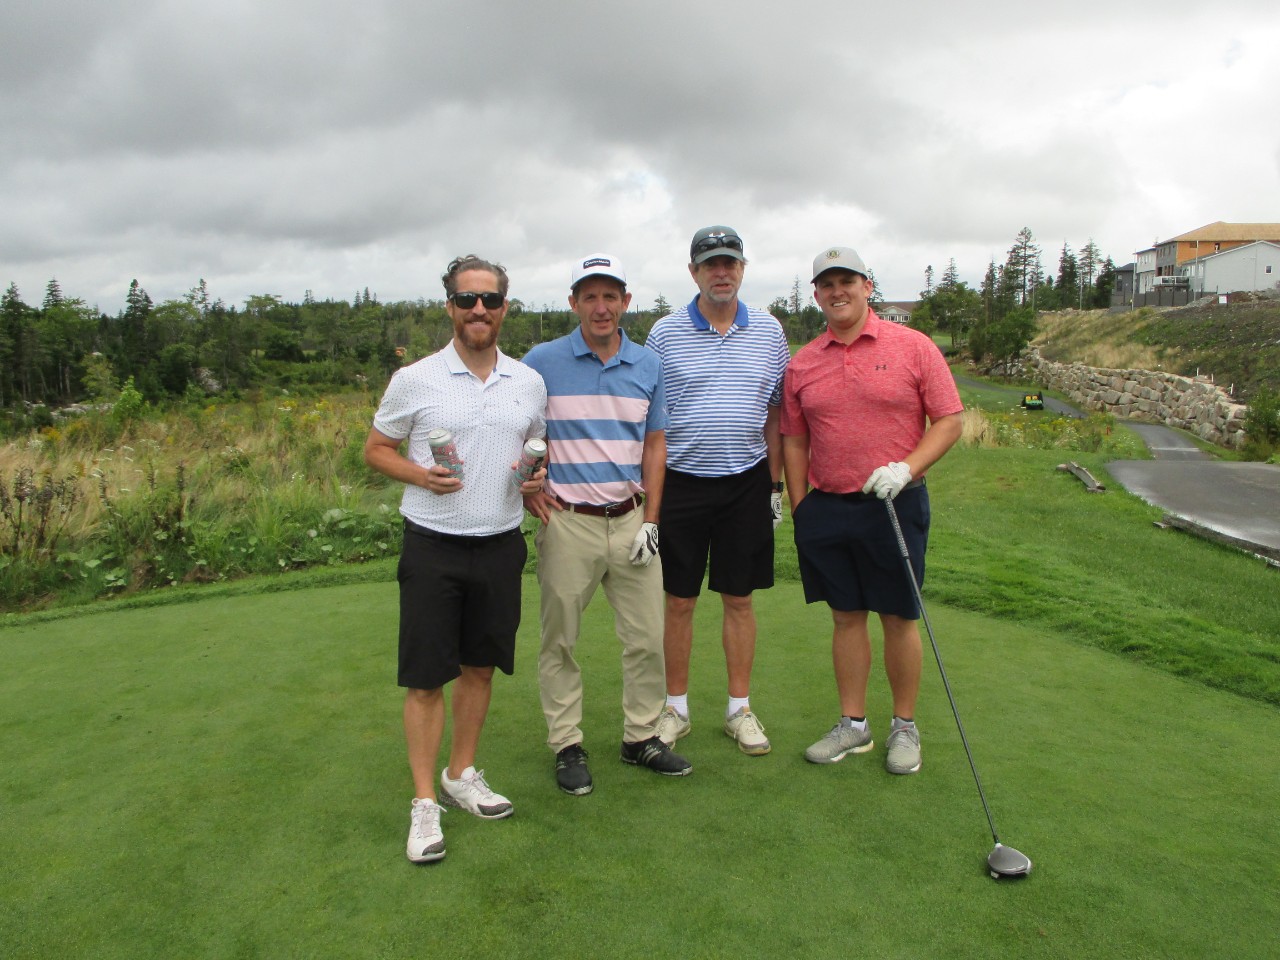 Four men standing on a tee box at a golf course